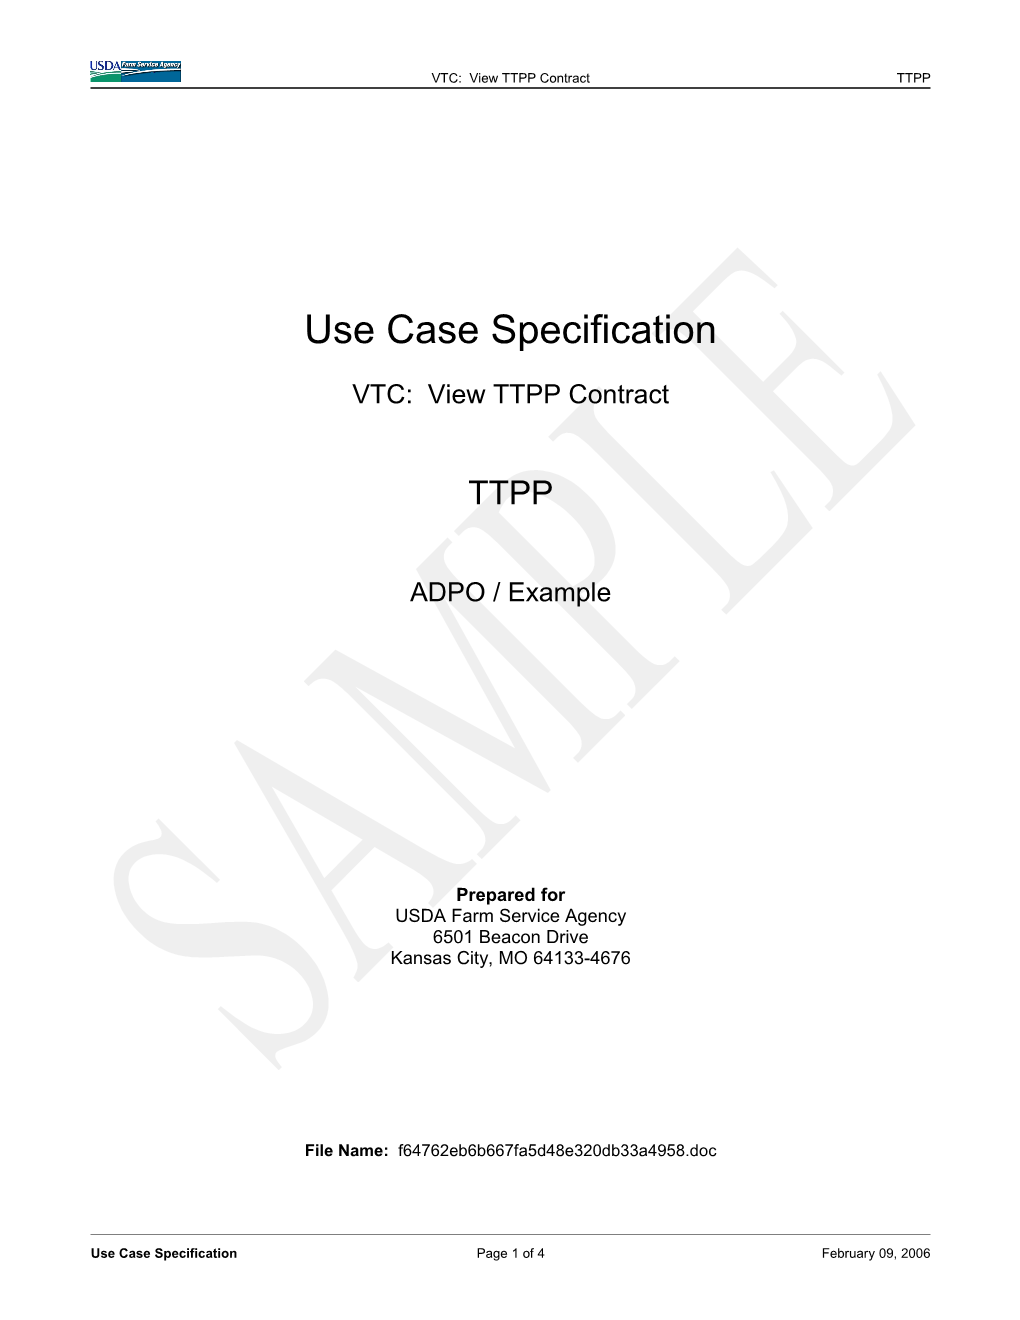 Use Case Specification s1